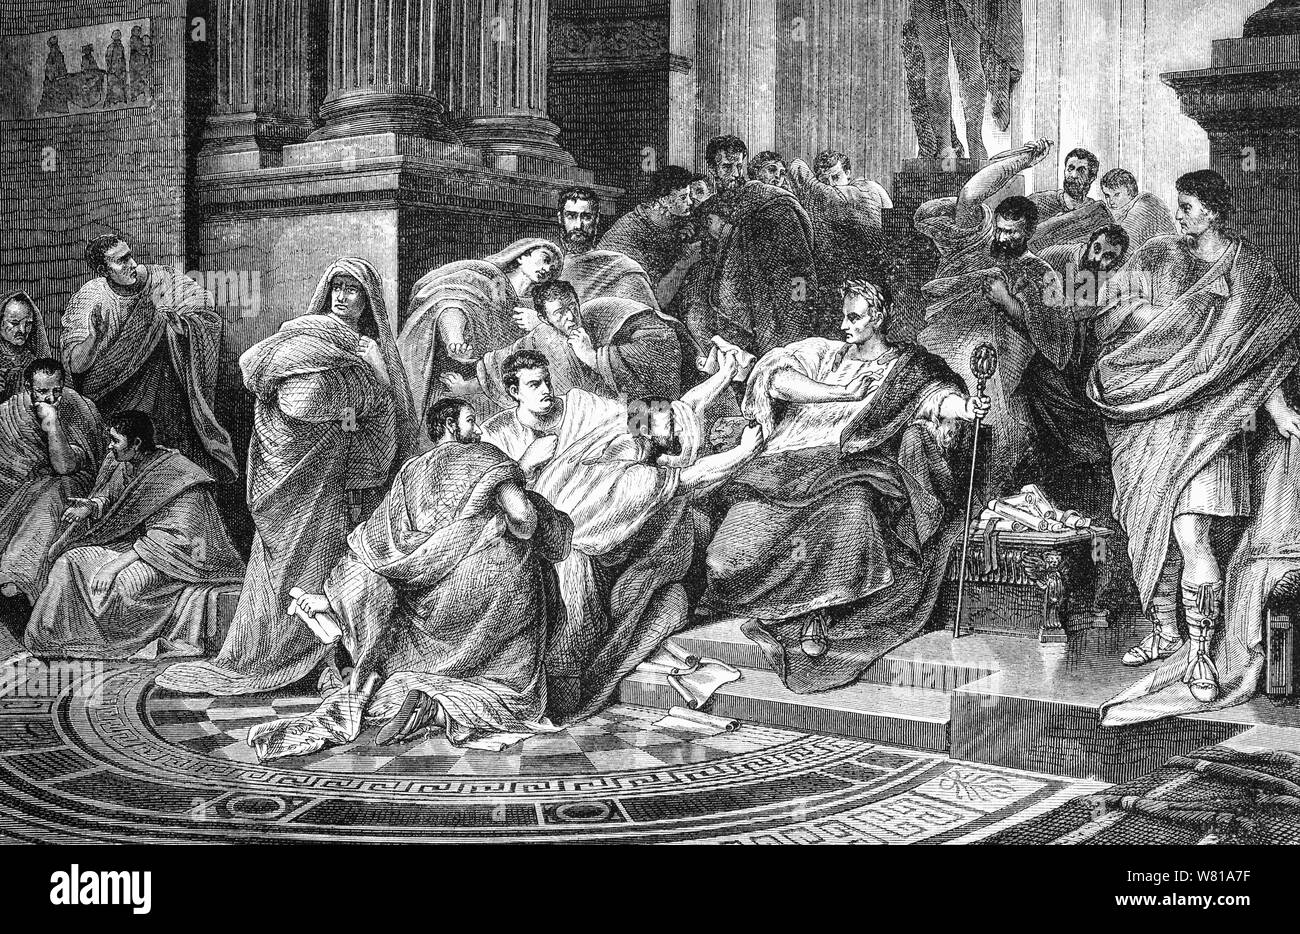 The assassination of Julius Caesar by a conspiracy of several Roman senators, led by Marcus Junius Brutus, Cassius Longinus, and Decimus Brutus, at the end of the Roman Republic. They stabbed Caesar to death in the Theatre of Pompey on the Ides of March (15 March) 44 BC.  Caesar had been named dictator for life by the Senate, a declaration that made many senators of the conservative Optimates faction fear that Caesar wanted to overthrow the Republic and establish a monarchy. They decided to kill him to save the Republic. Stock Photo